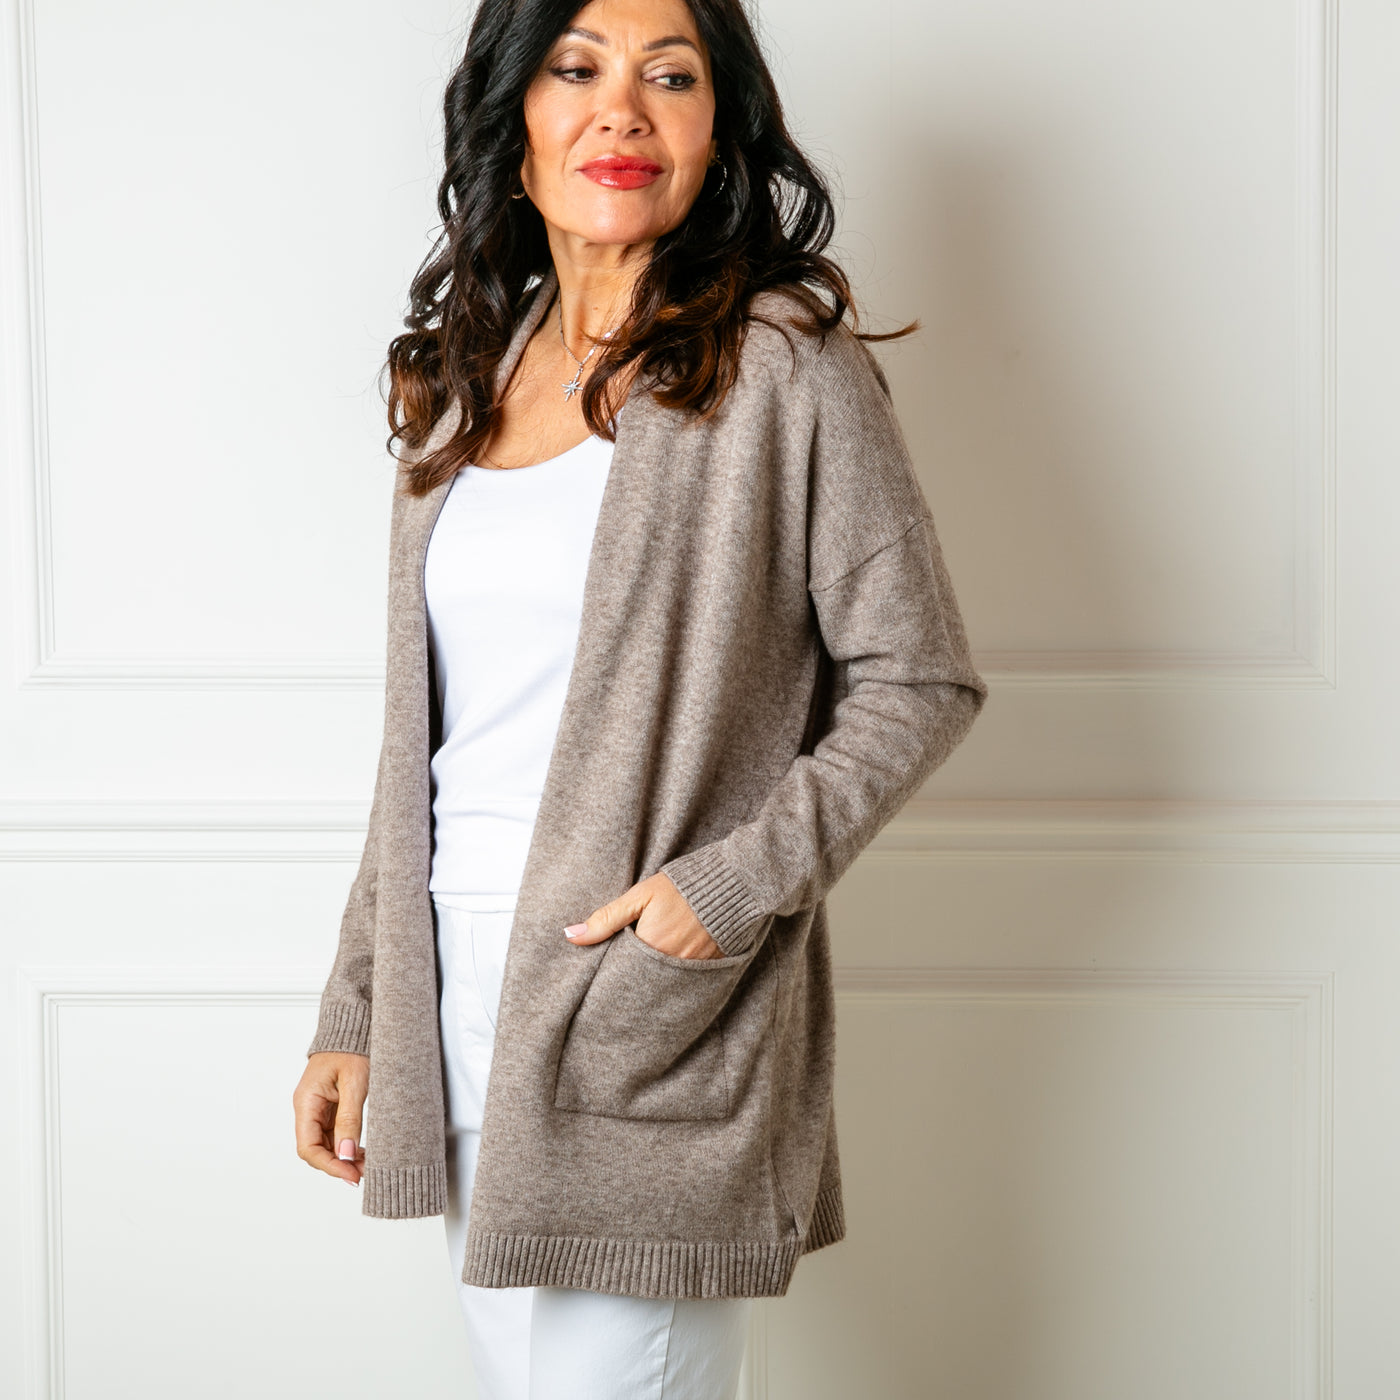 The Essentials Knit Cardigan in taupe brown beige with an open front and pockets on either side